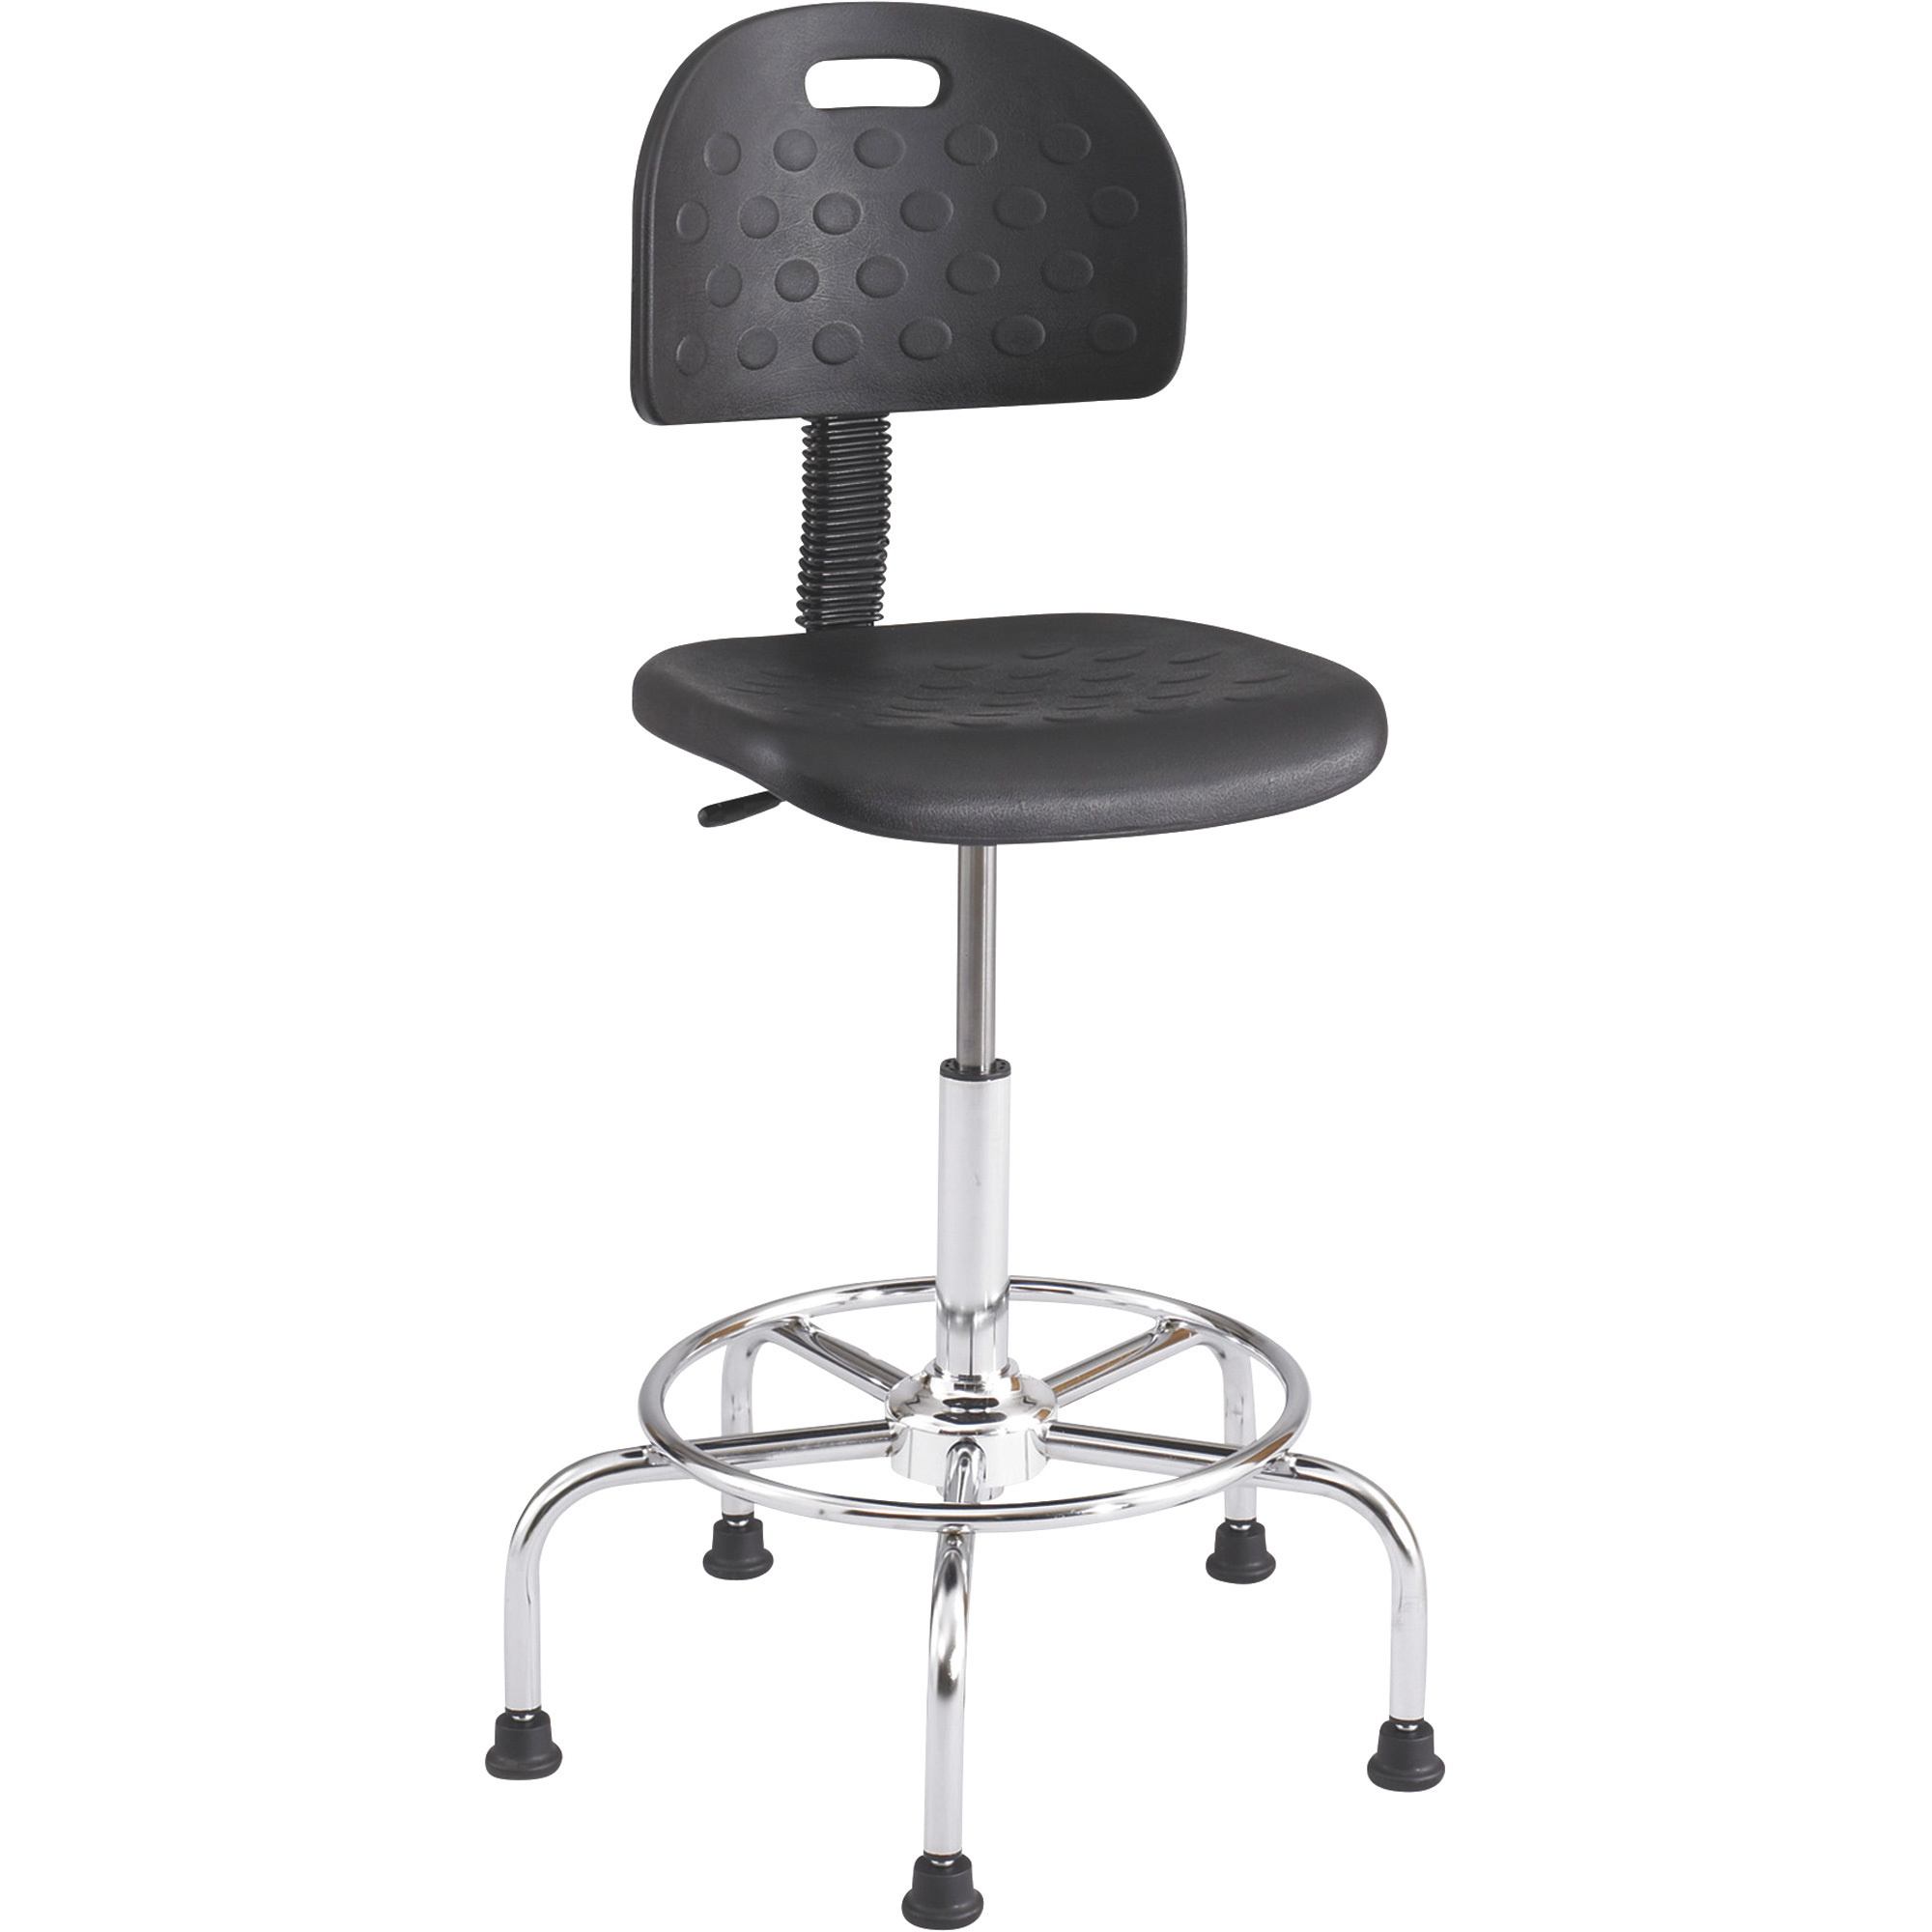 Safco WorkFit Economy Industrial Chair — 25Inch Diameter x35 1/2Inch-46Inch H, Black, Model 6950BL -  Mayline Safco